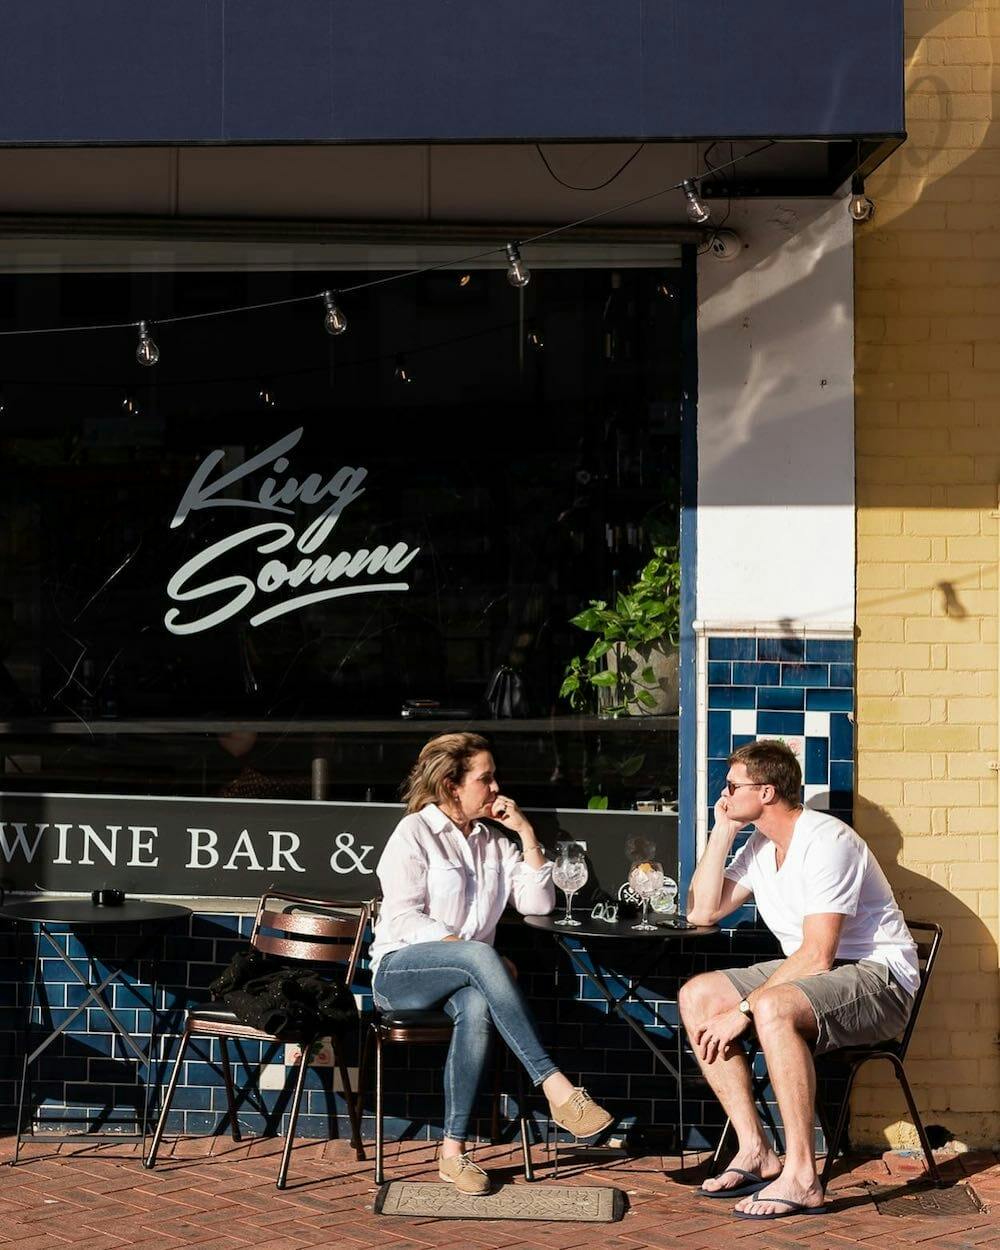 Perth's Best Bars, King Somm, Bayswater